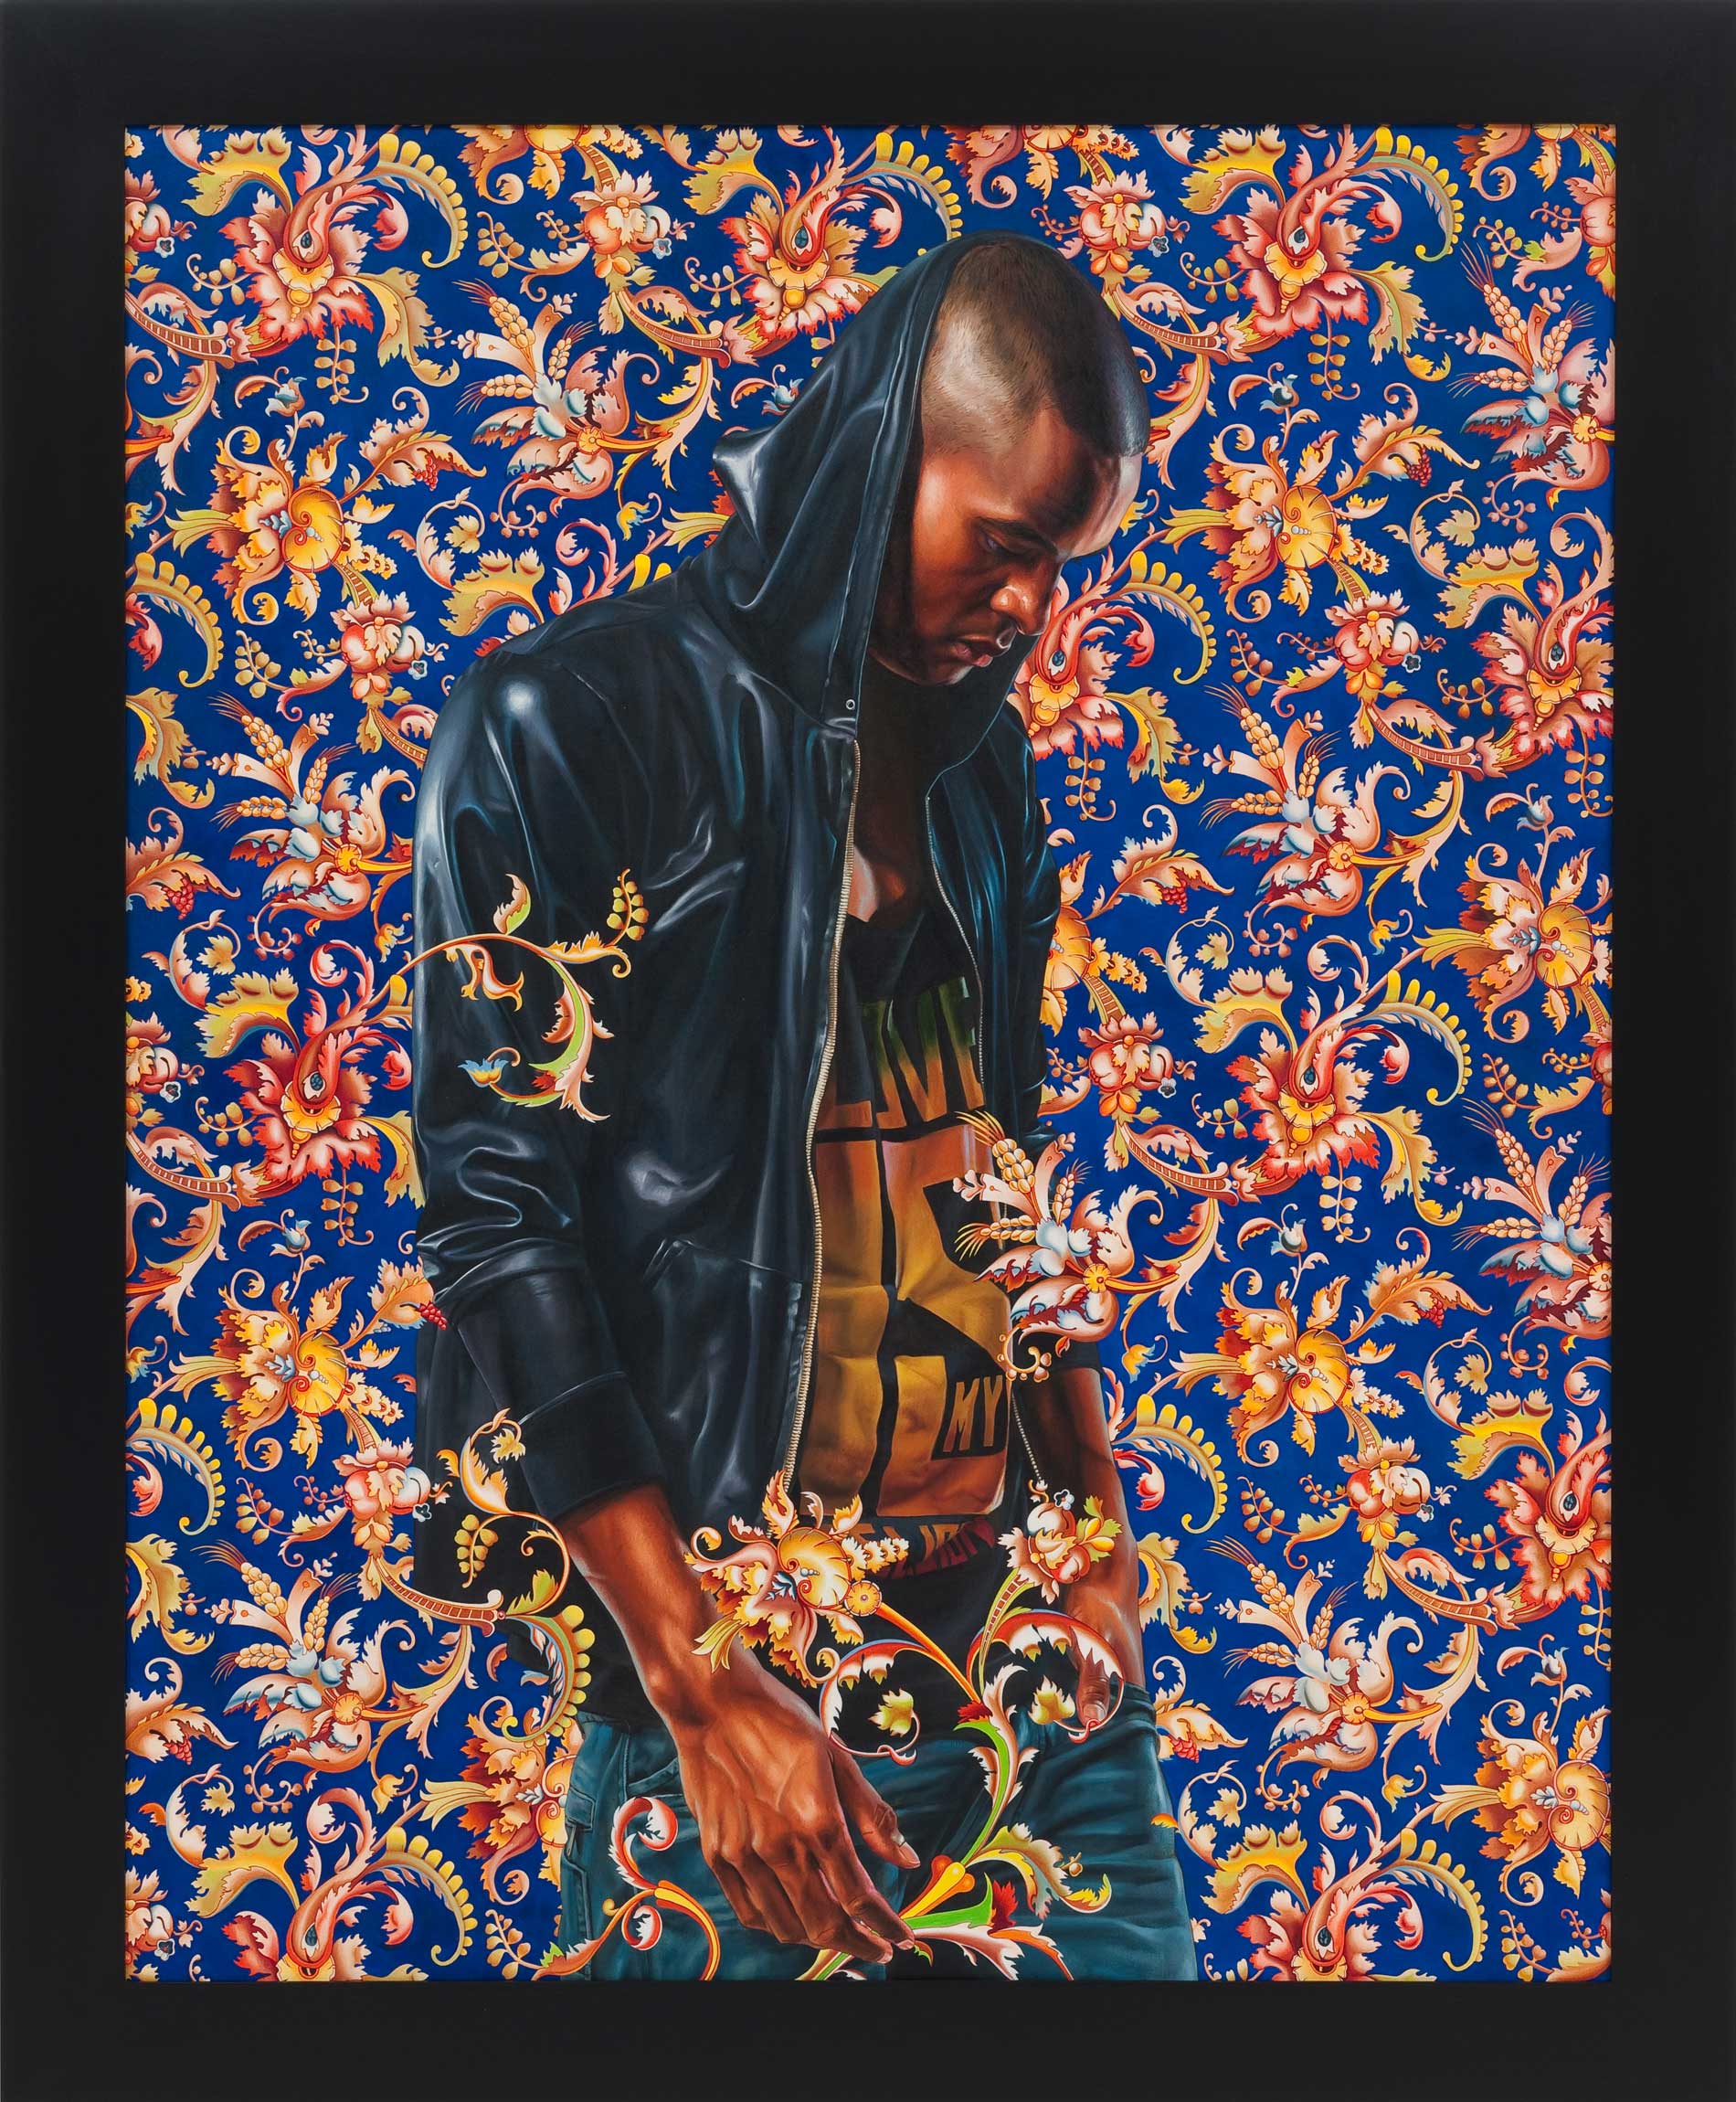 Kehinde Wiley | Selected Works: 2012 | Morthyn Brito IV, 2012, Oil on Canvas. | 6